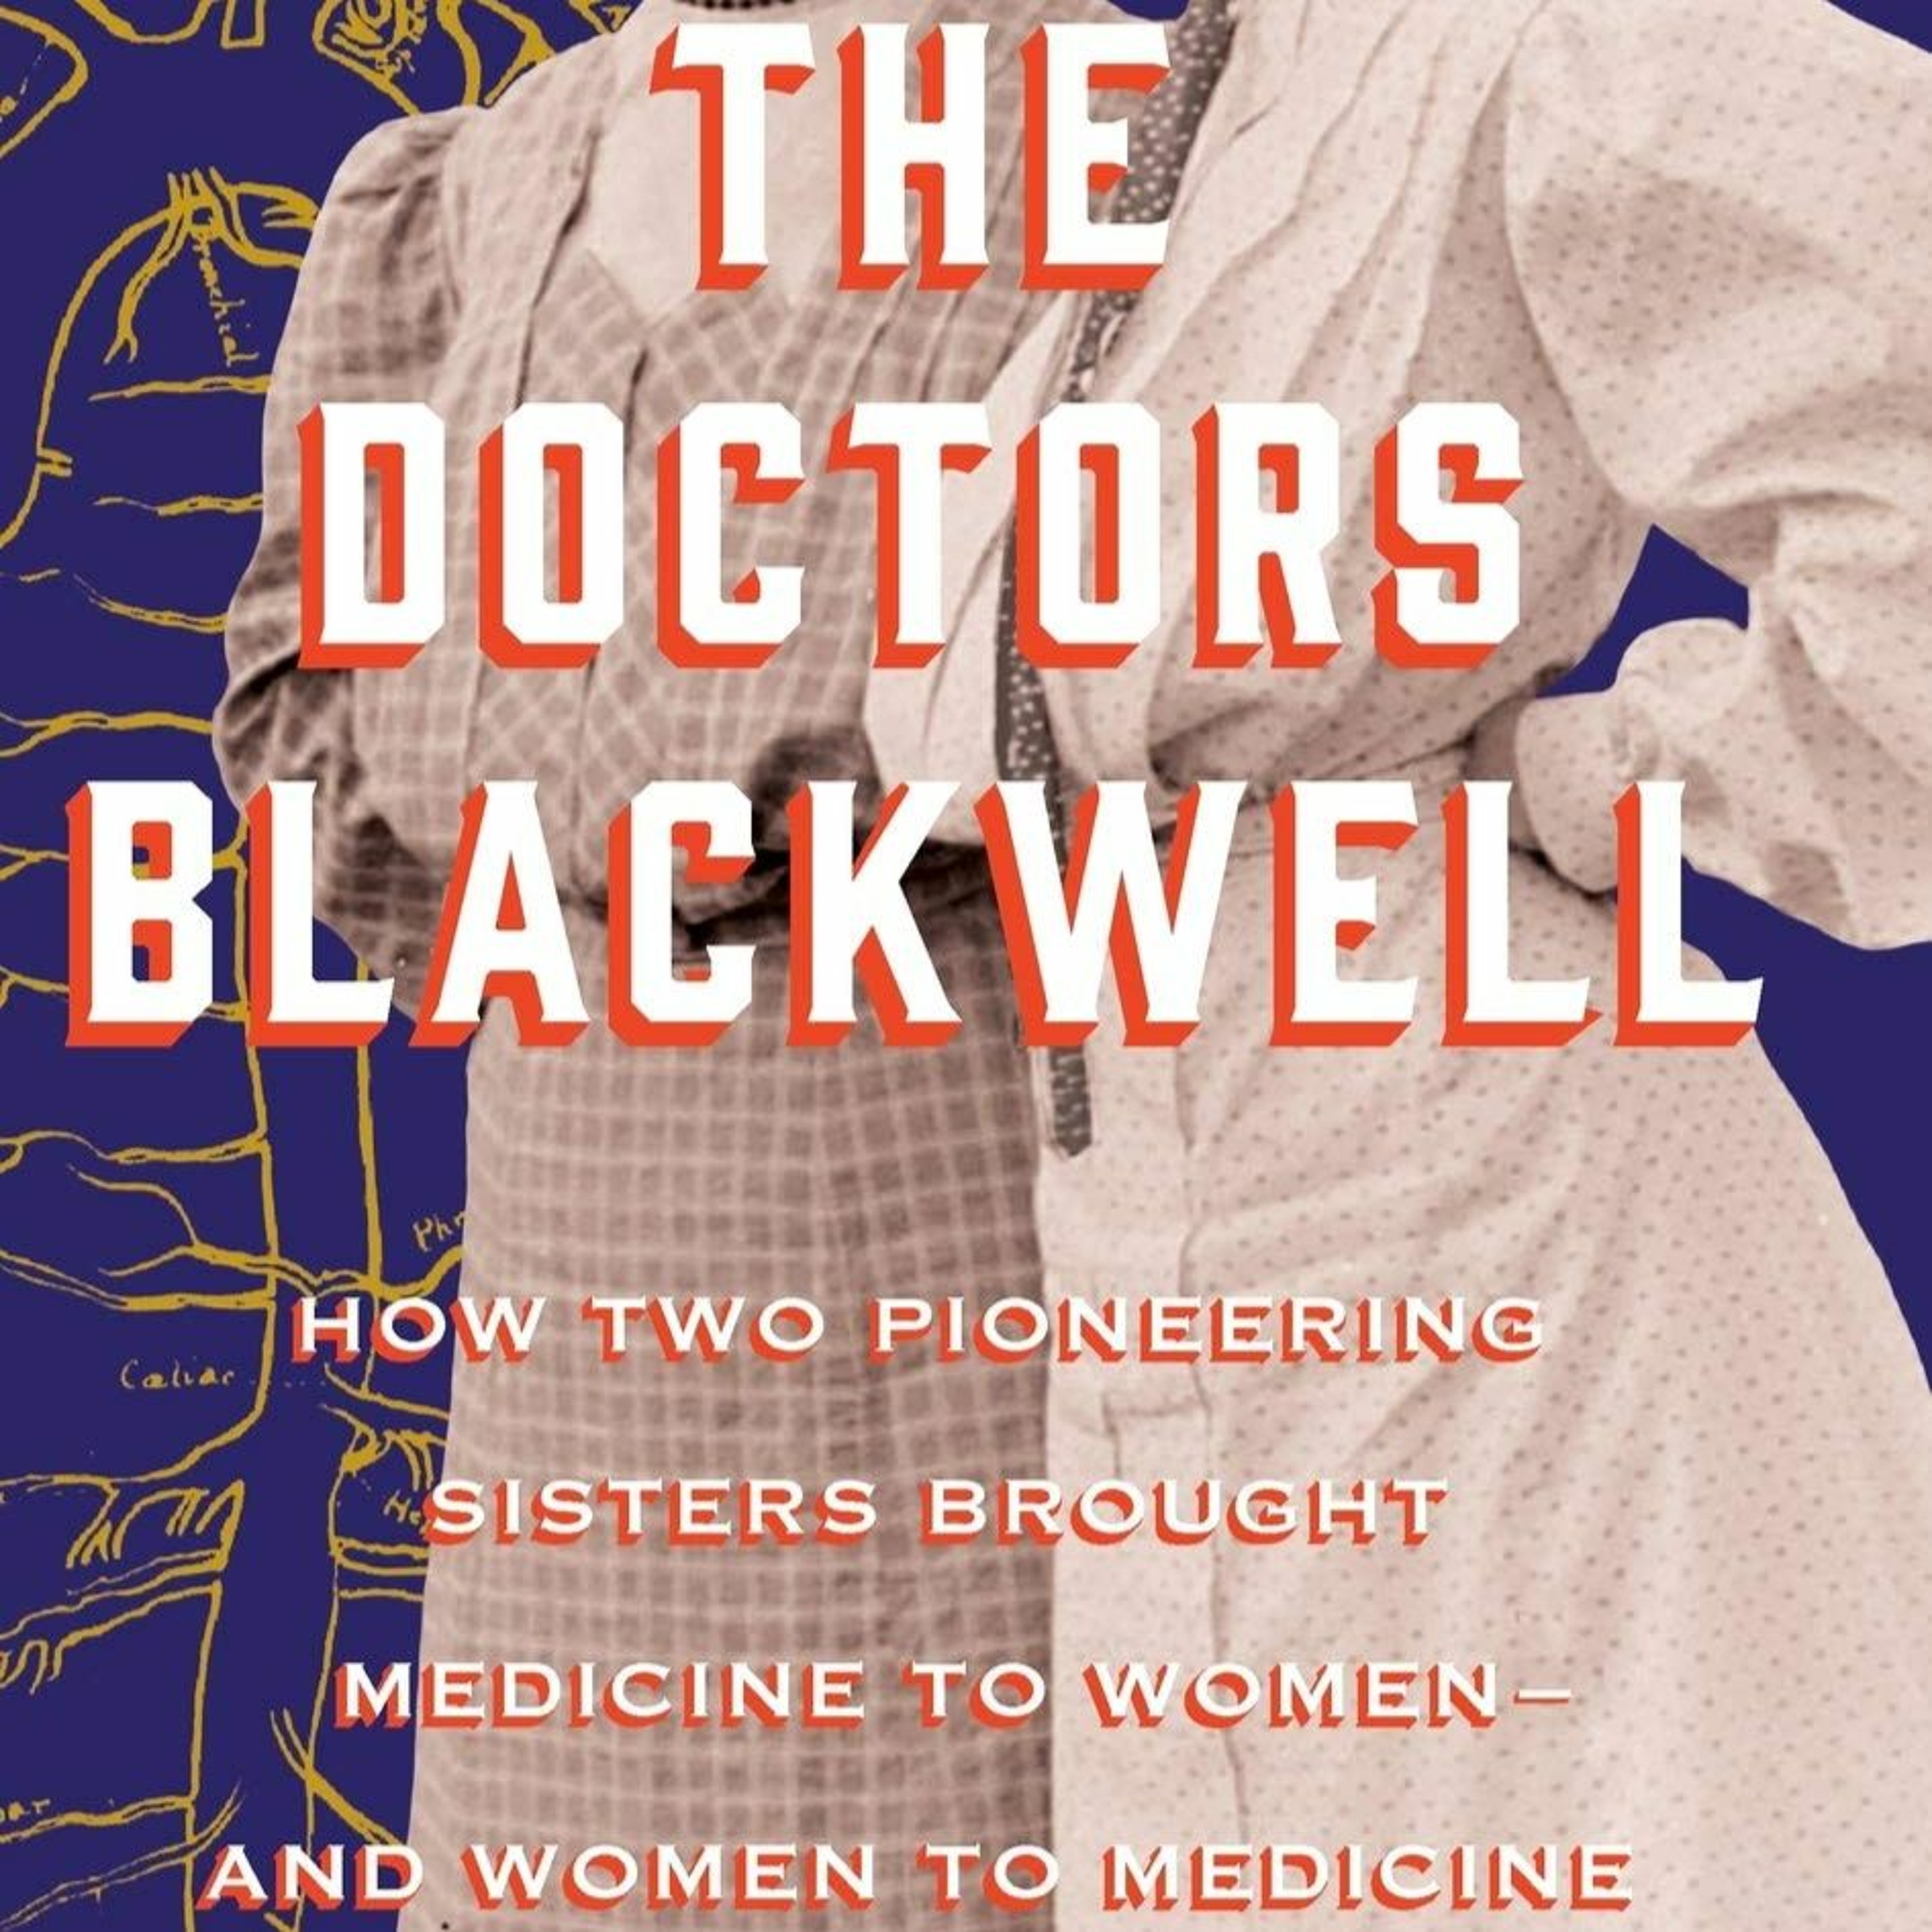 Janice P. Nimura, ”The Doctors Blackwell: How Two Pioneering Sisters Brought Medicine to Women”